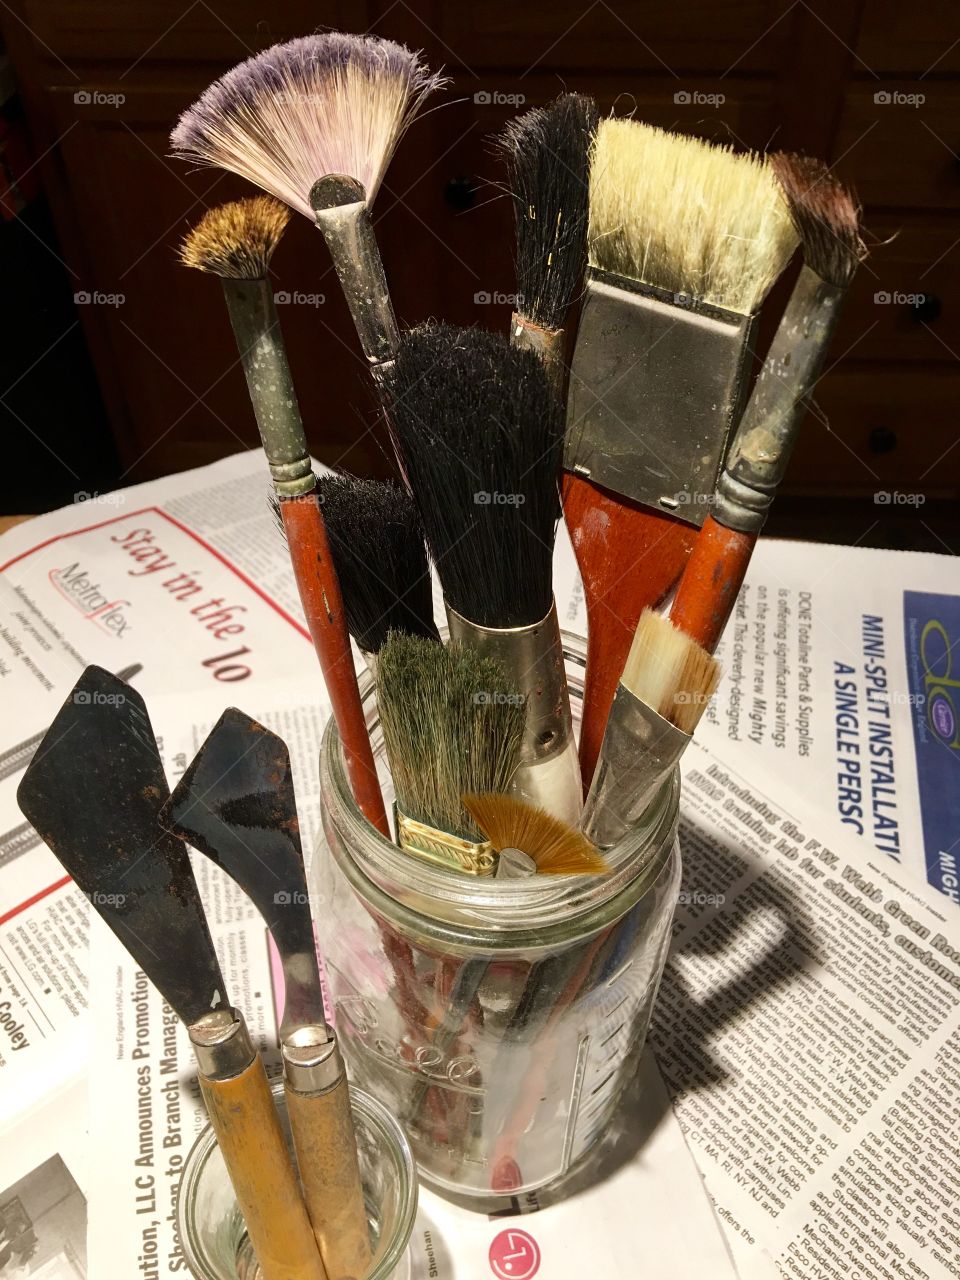 Oil Painting Brushes Well Used

I'm going through my old oil painting brushes to see how well they've held up after being stored away.